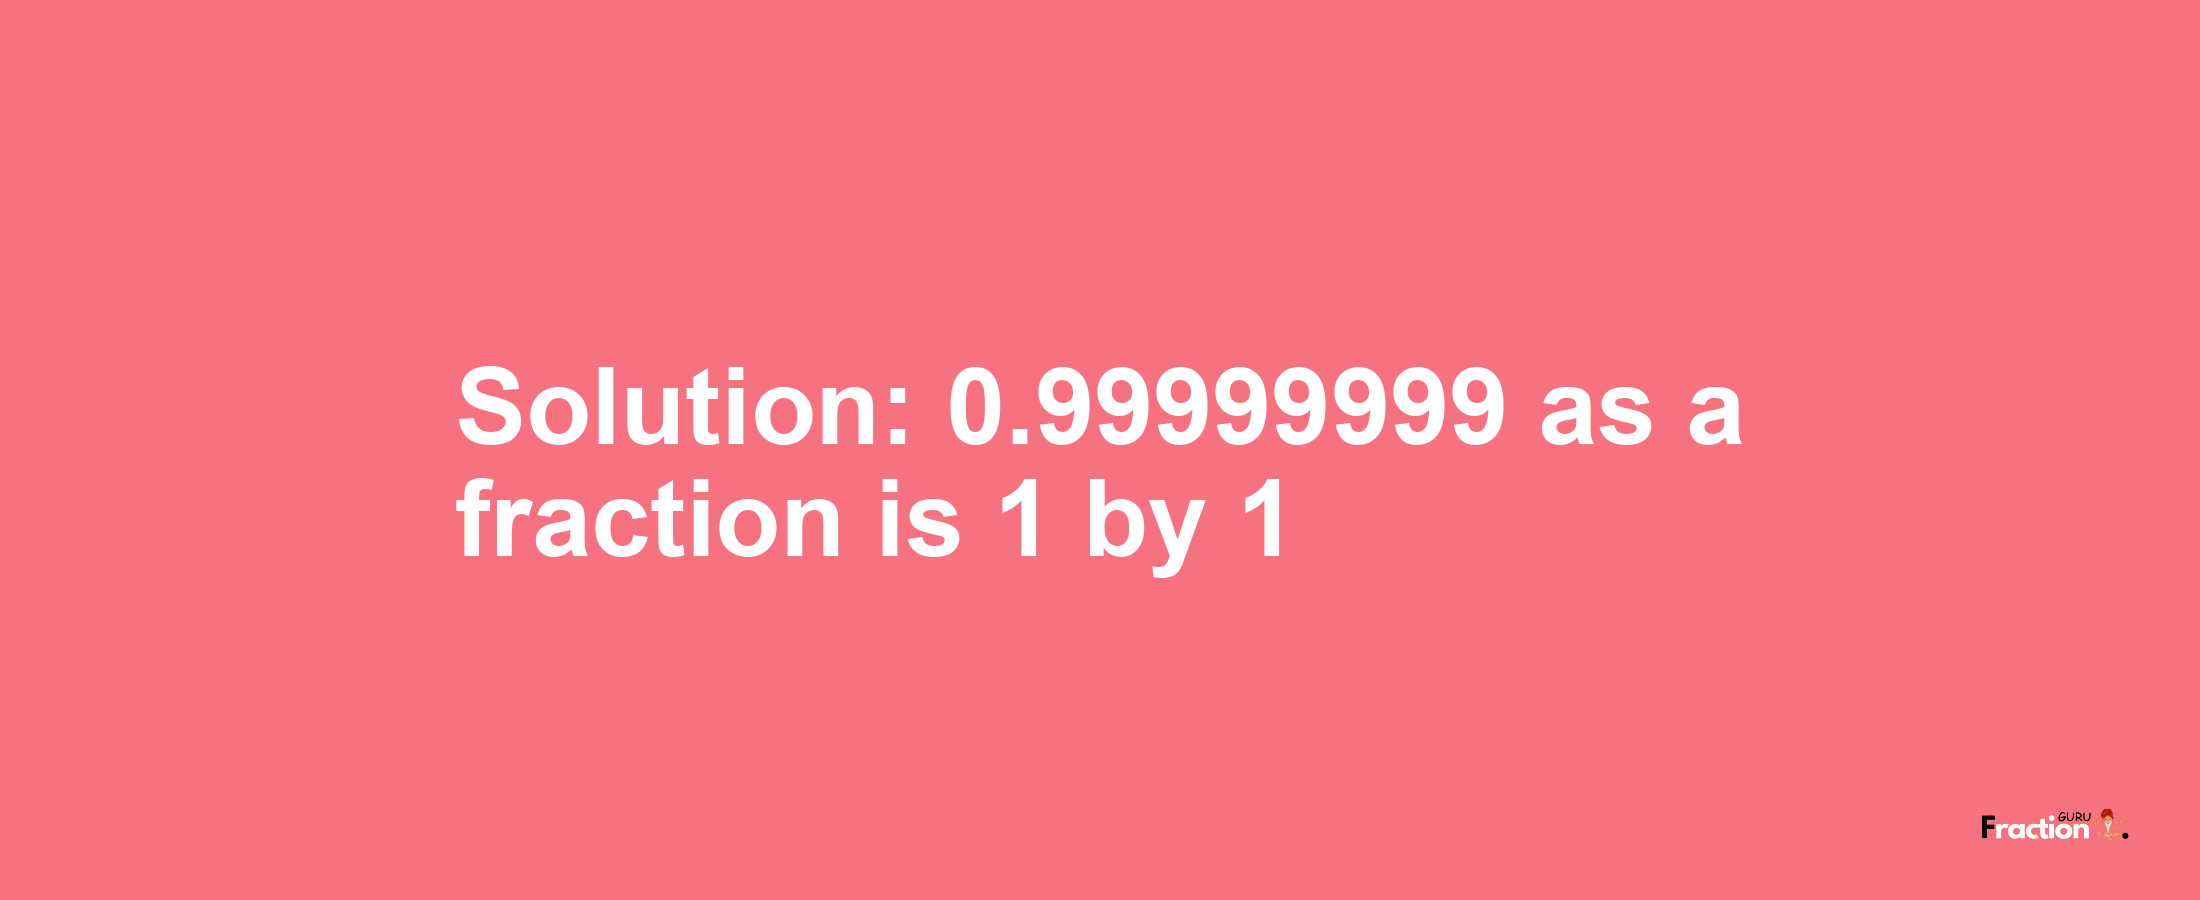 Solution:0.99999999 as a fraction is 1/1